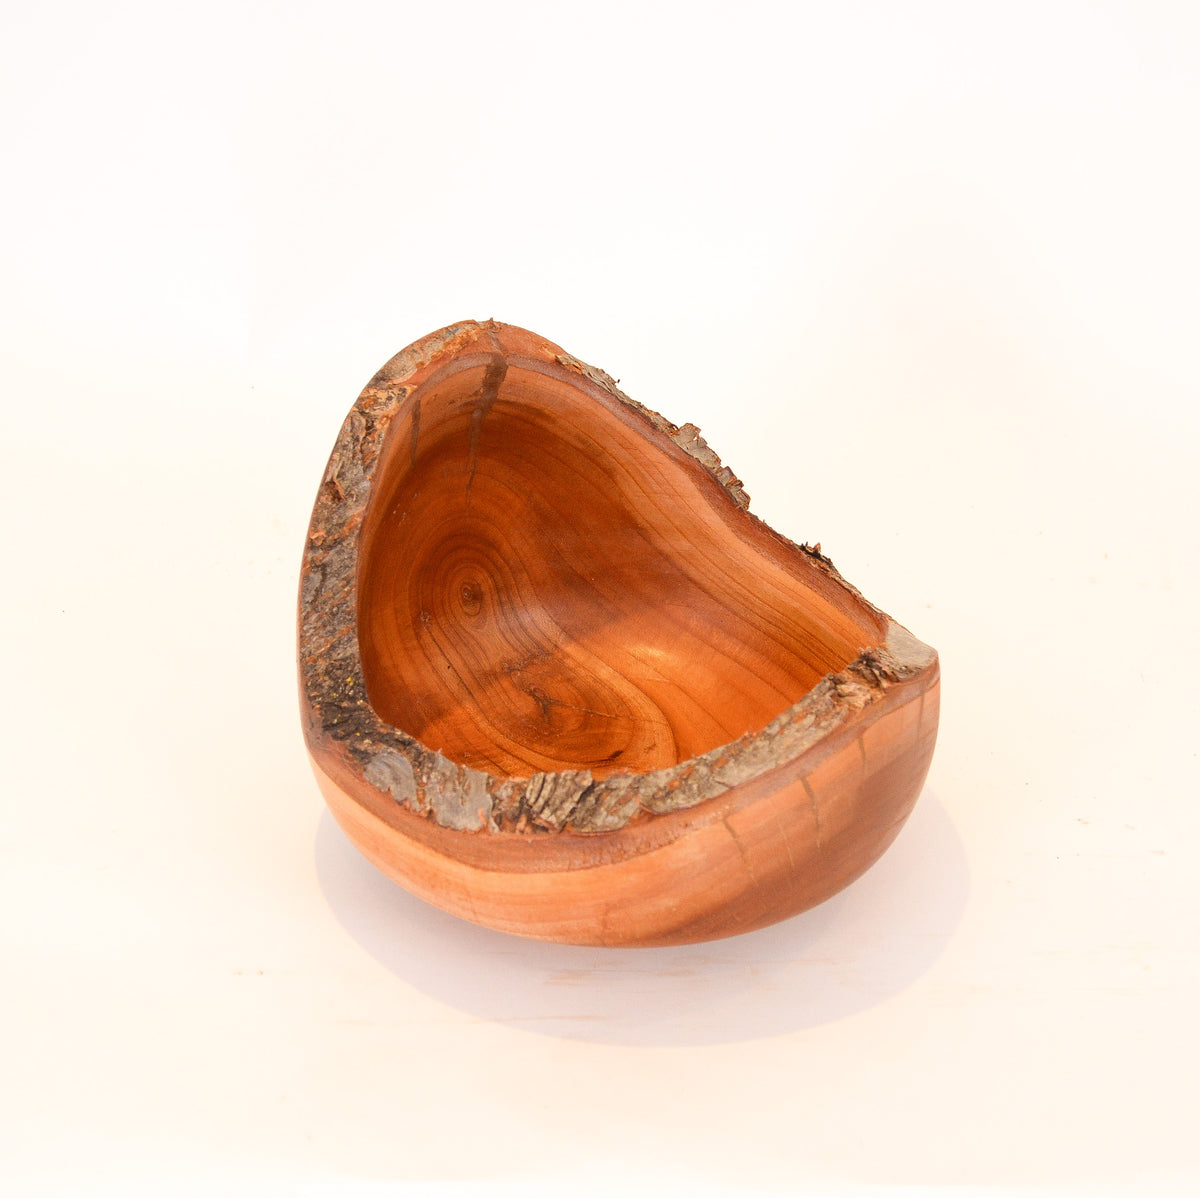 Natural Edge Wood Turned and Carved Bowl: Thick, Bark On